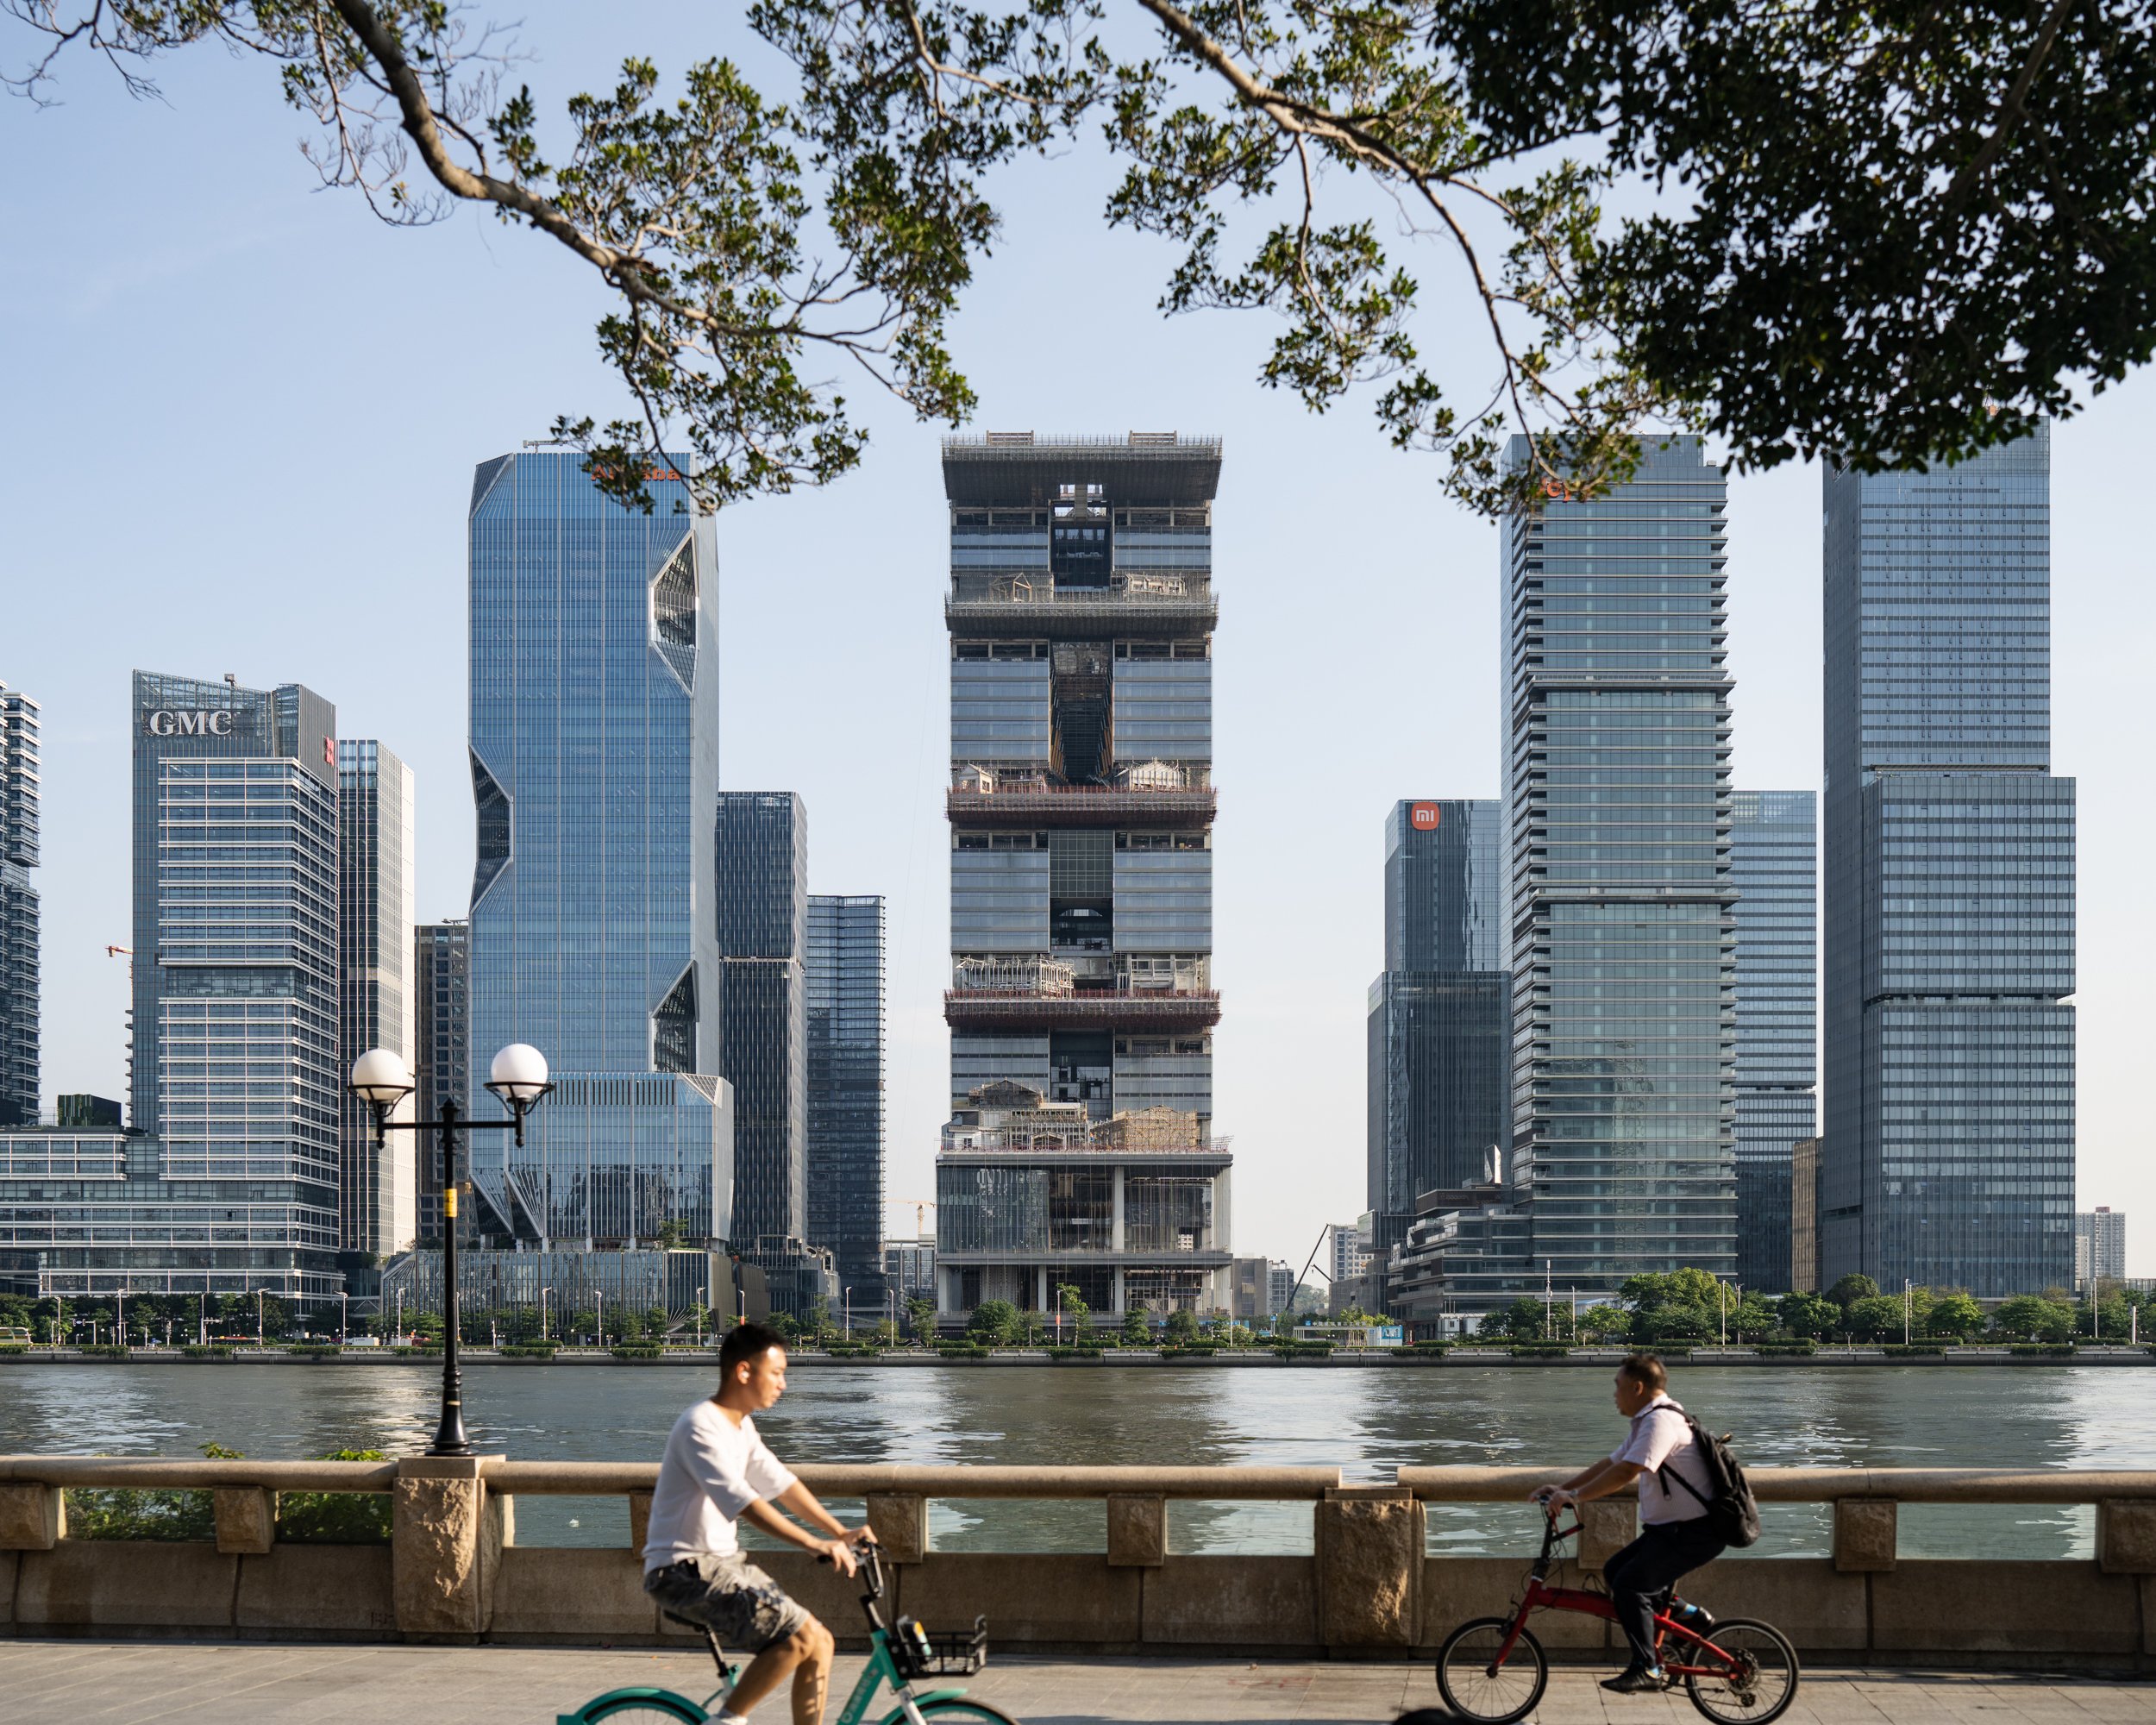  Tencent Tower Design by Ateliers Jean Nouvel  Guangzhou 